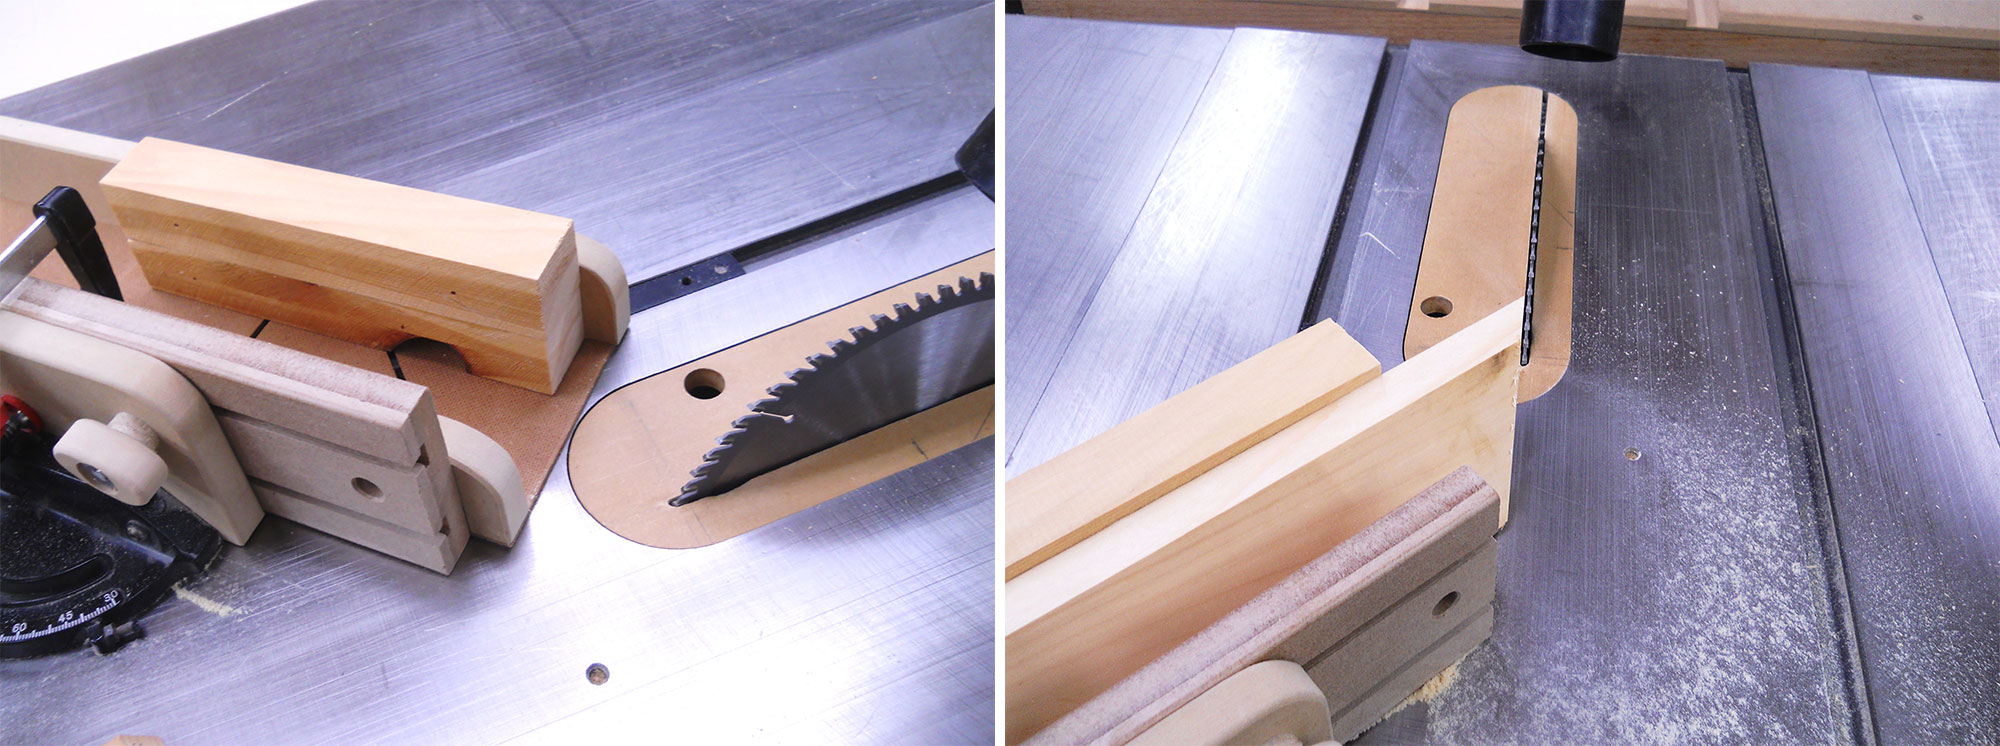 Image 1: Cutting compound miters on table saw. Image 2: Cutting compound miters on table saw.